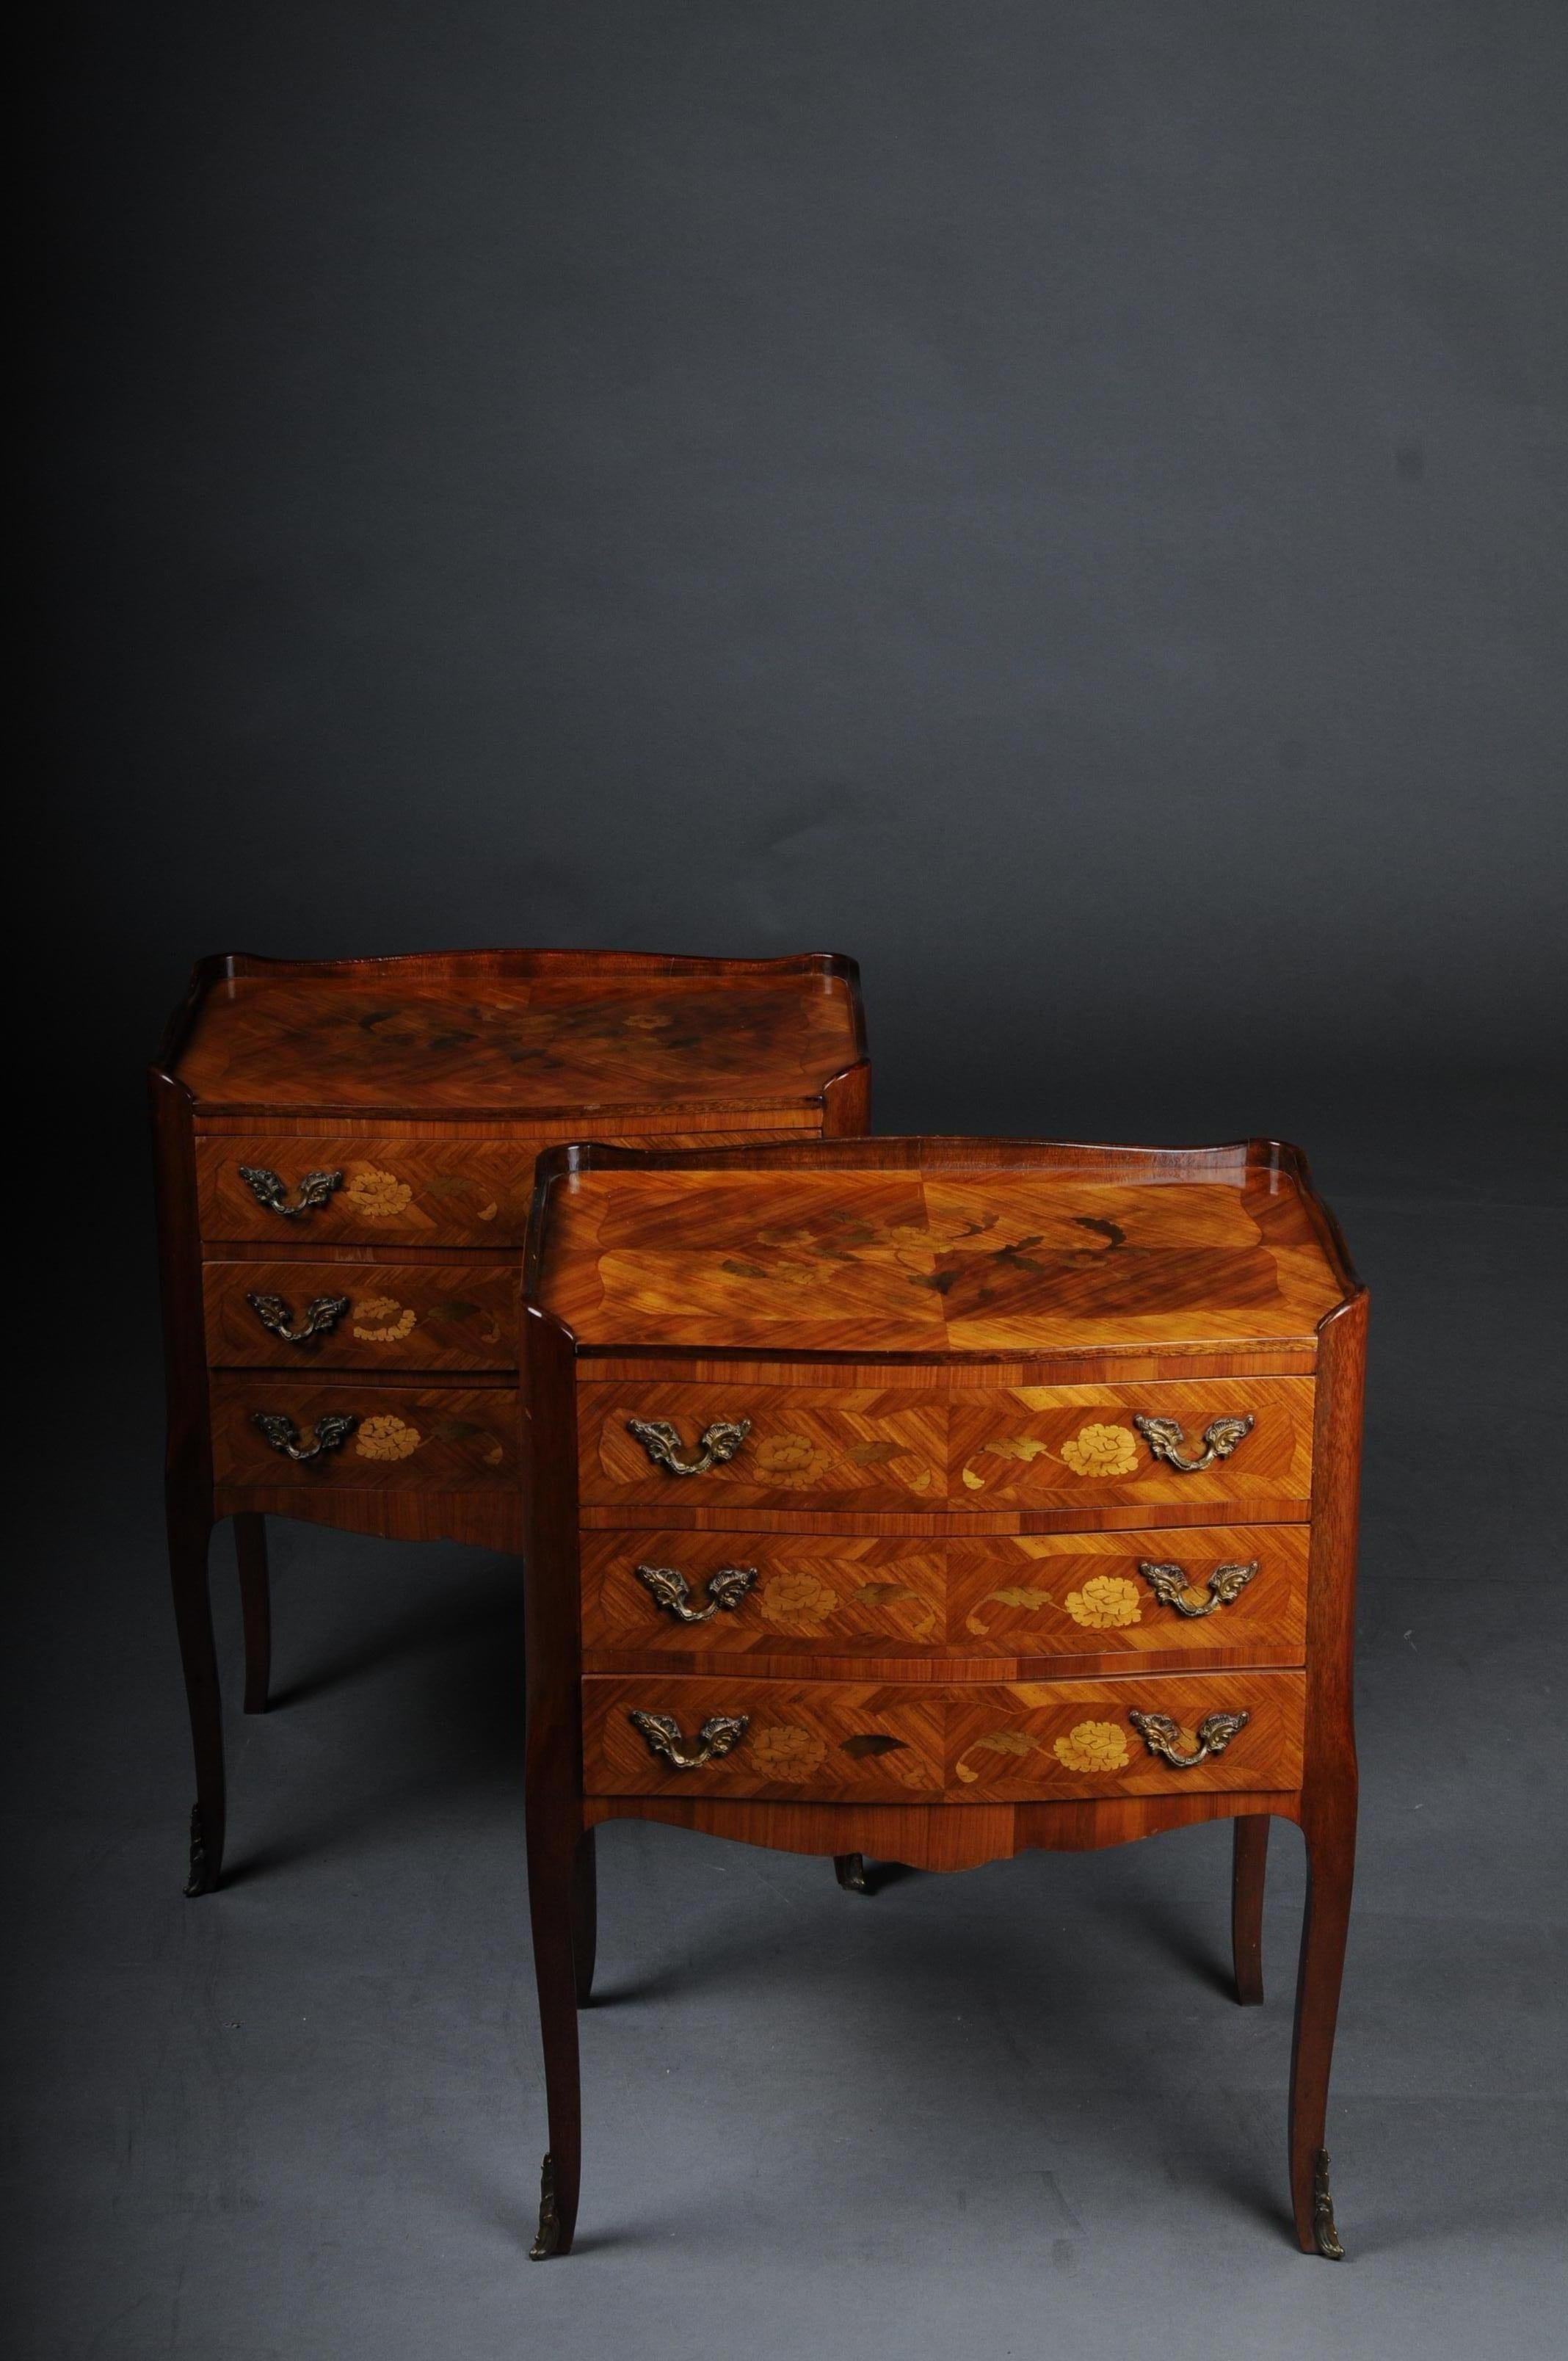 Pair of (2) chests of drawers Louis XV 20th century, marquetry

Solid wood with marquetry tulip veneer. Each 3 drawer box body with decorated brass handle. Cover plate with high border. Body on tall, elegant legs. Extremely decorative and